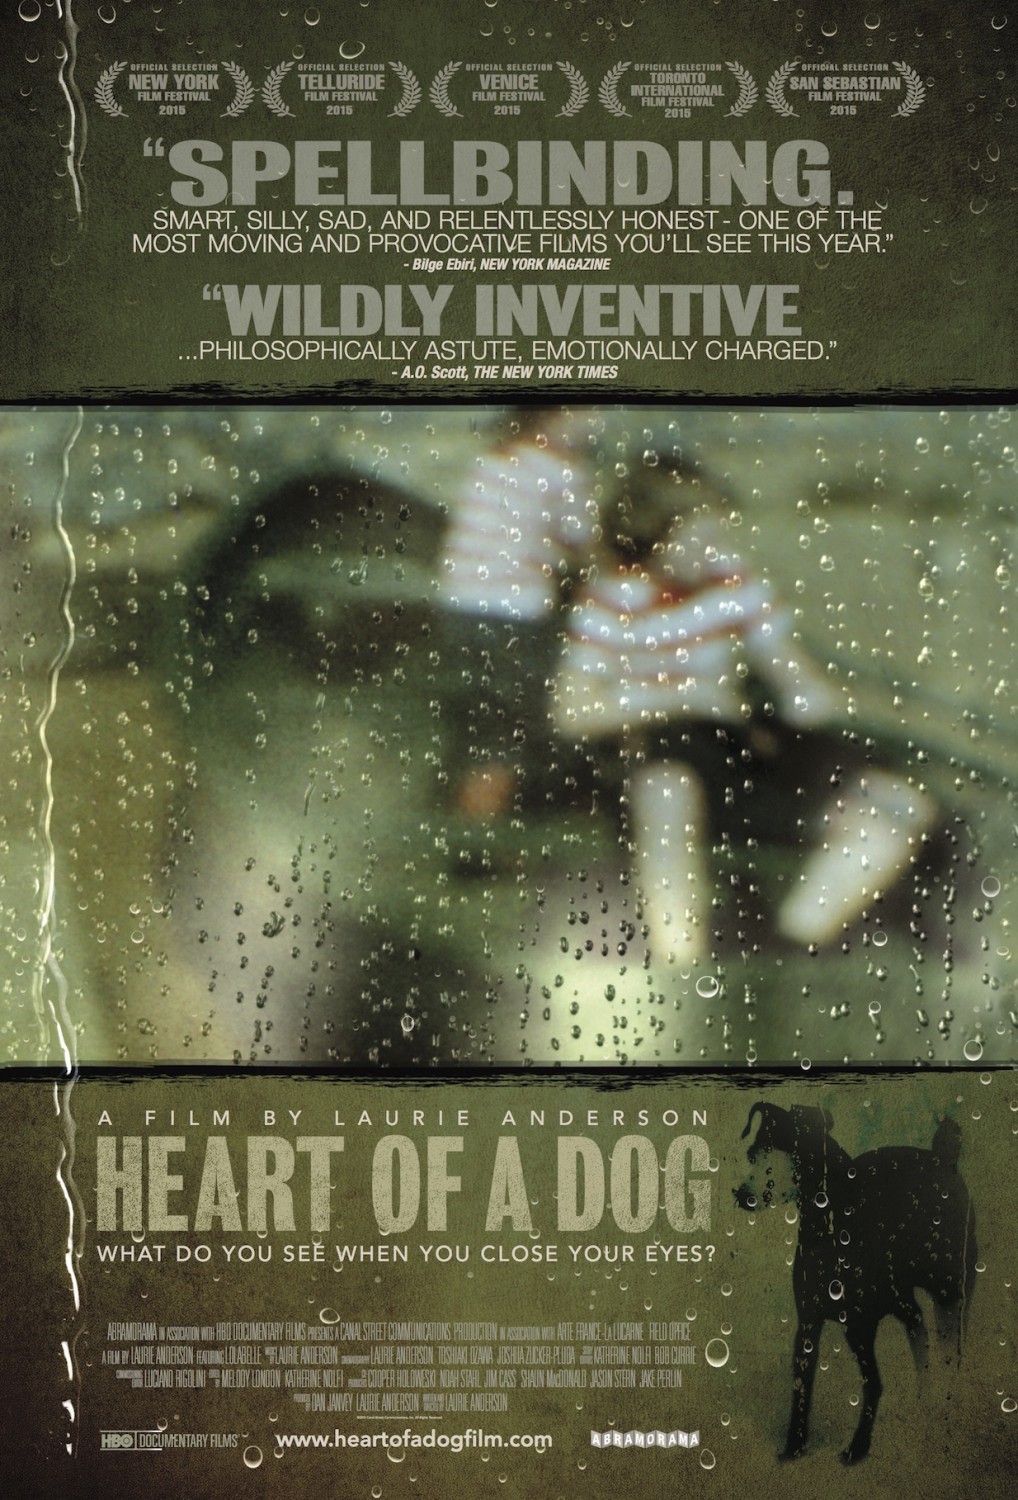 Poster of Abramorama's Heart of a Dog (2015)